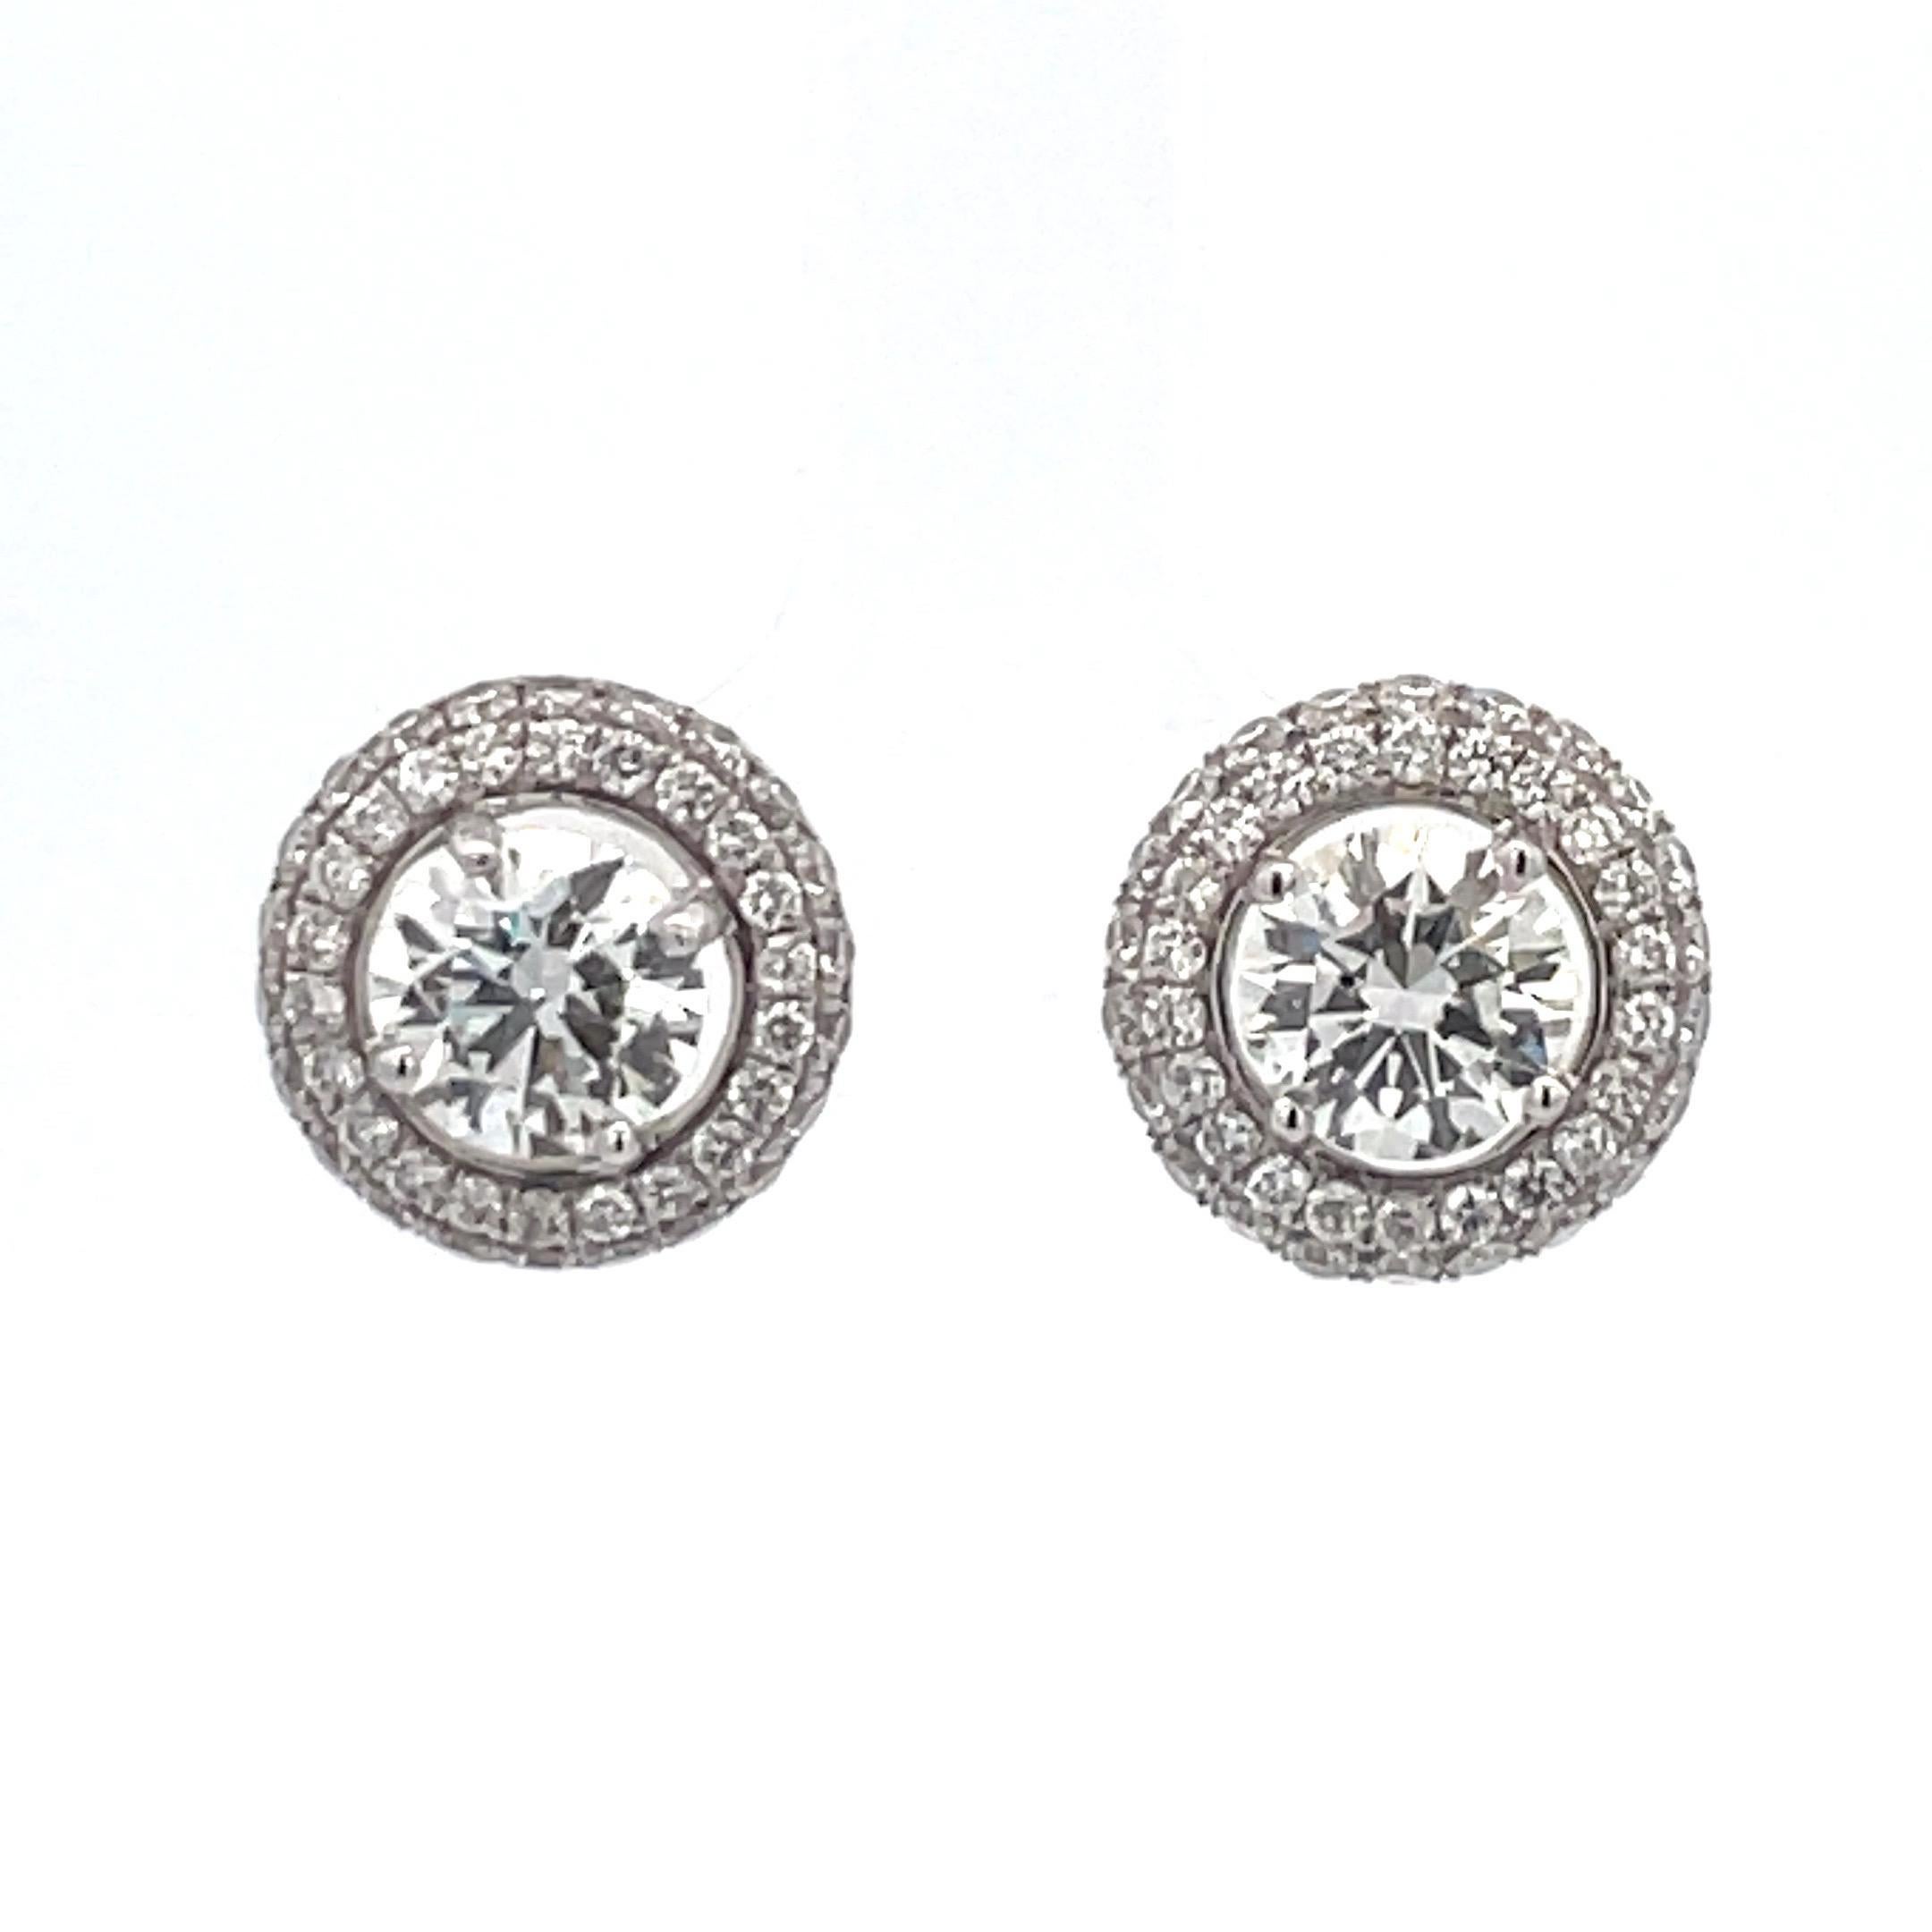 GIA Certified Diamond stud earrings weighing 2.01 Carats, in 18 Karat White Gold 4 Prong Basket Setting.
Halo mounting is attached, it can be removed.
Color J
Clarity SI1

Setting can be changed to a Basket, Martini or Champagne/ 3 or 4 Prong/ 14 or